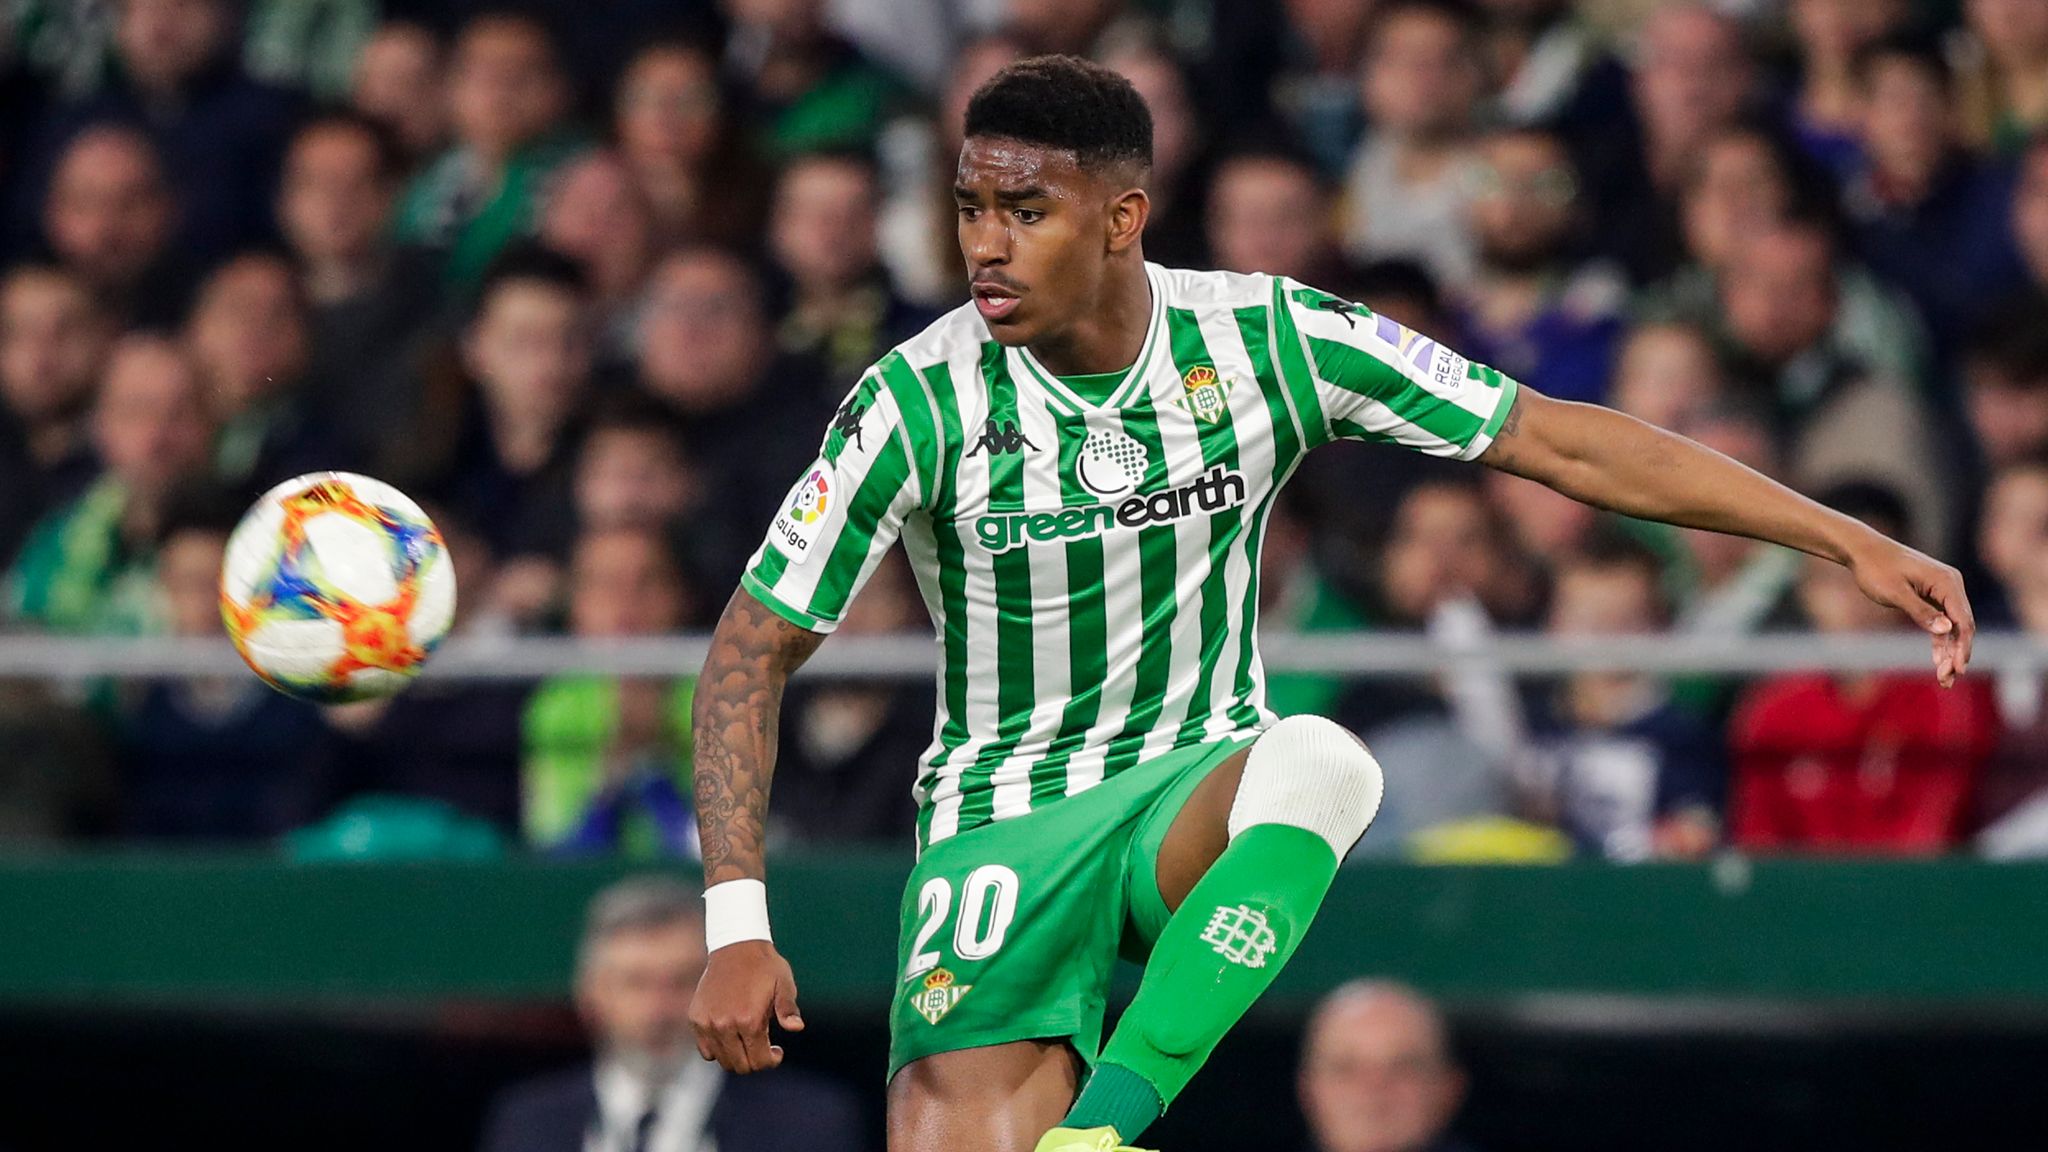 Barcelona sign Junior Firpo from Real Betis for £16.5m - Football News - Sky Sports